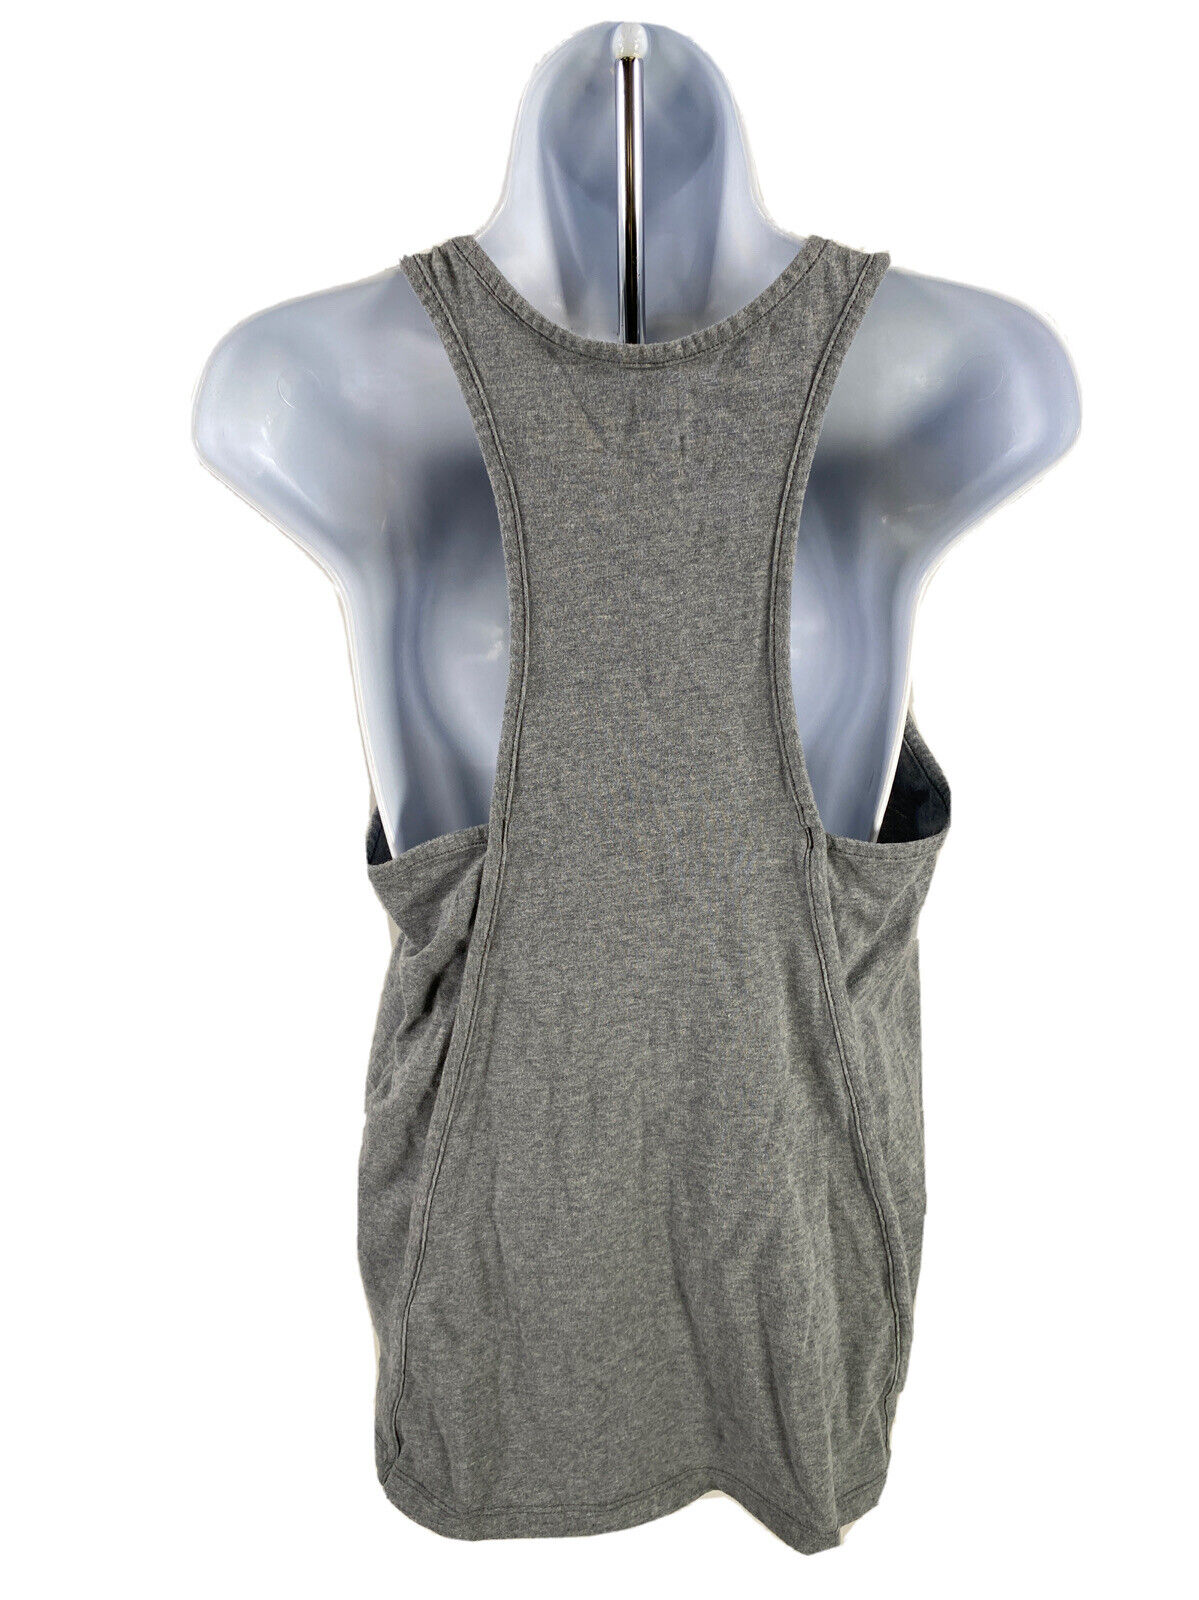 Under Armour Women's Gray Sleeveless Loose Fit Racerback Tank Top - S